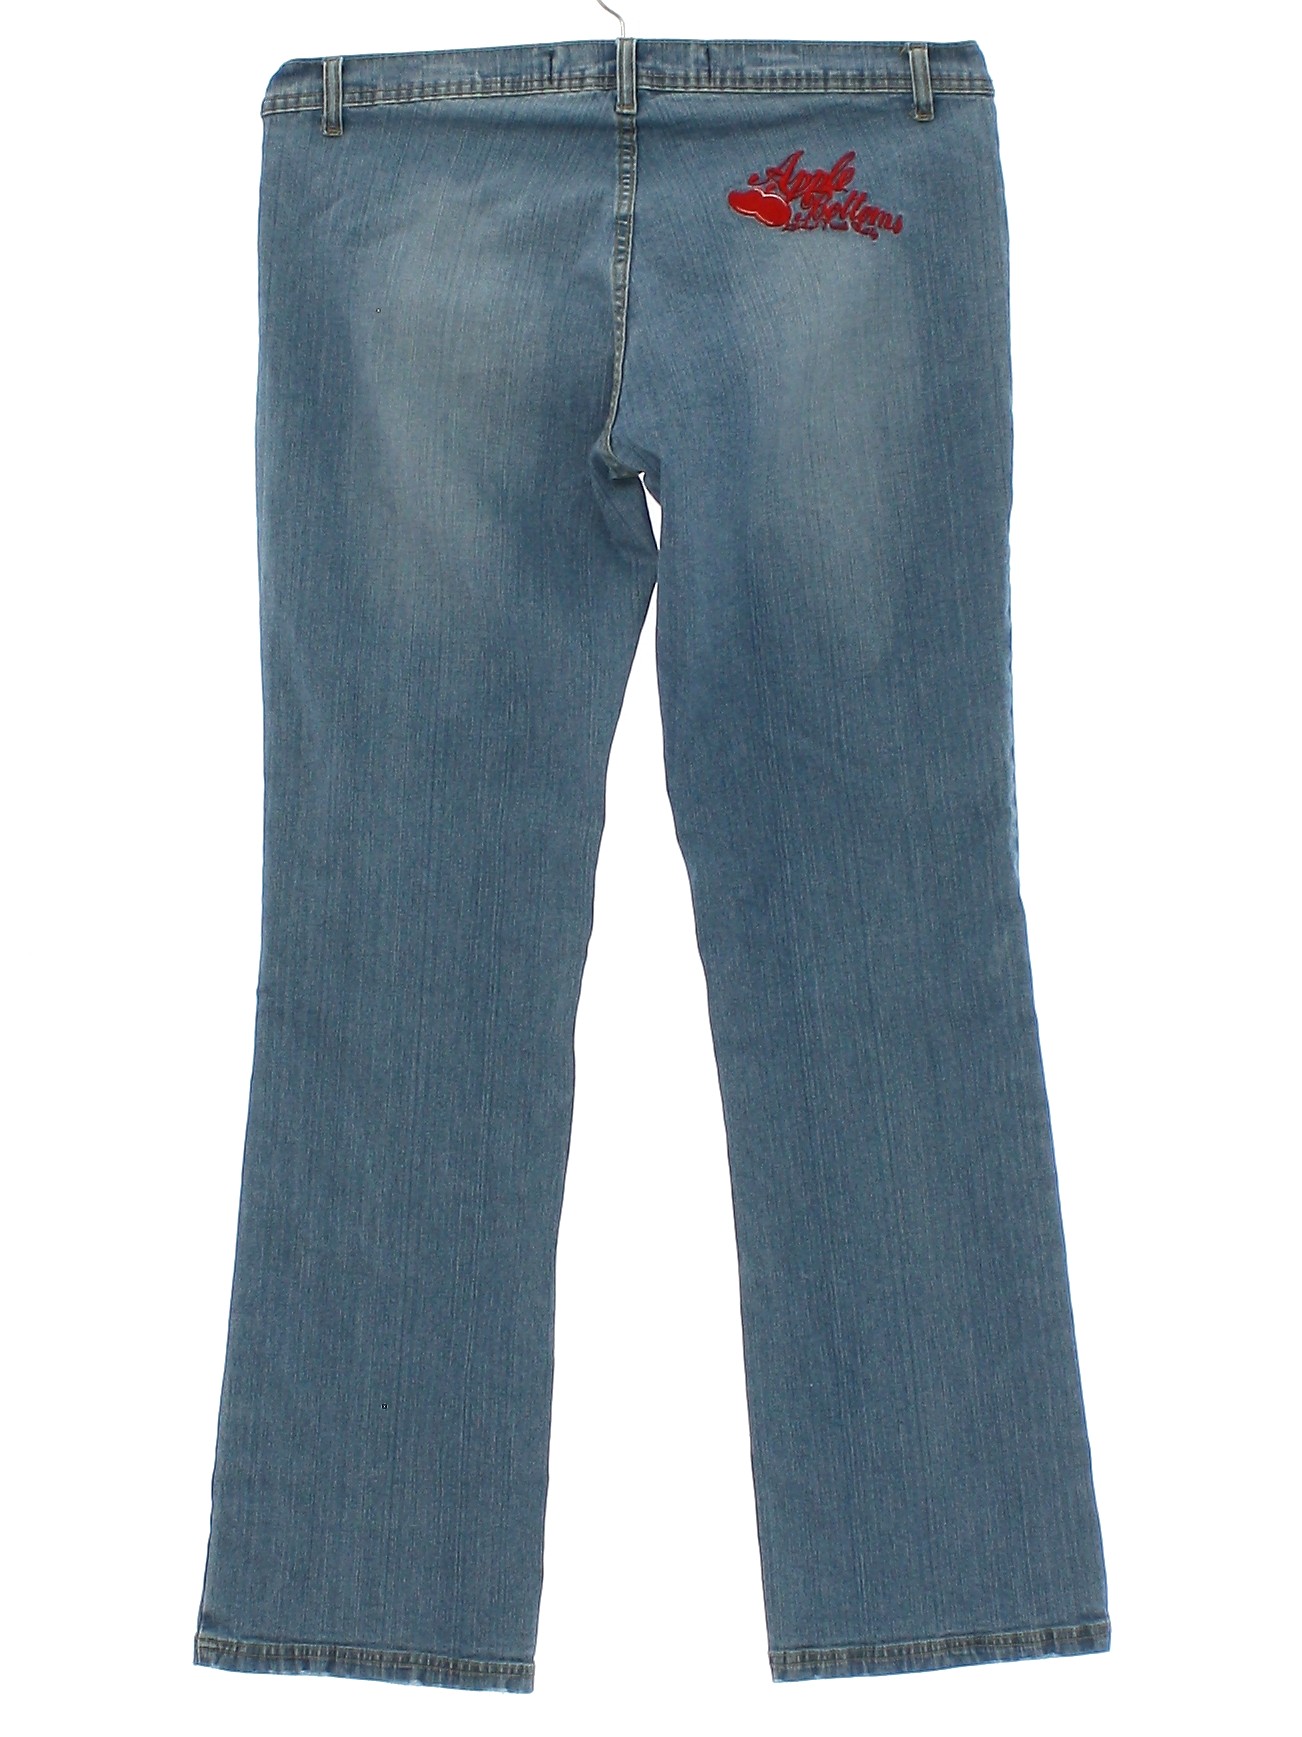 Pants: 90s (Late 2000s) -Apple Bottoms- Womens slightly and worn medium blue cotton spandex denim jeans pants with zipper fly closure with button. Front scoop pockets no rear pockets. 2